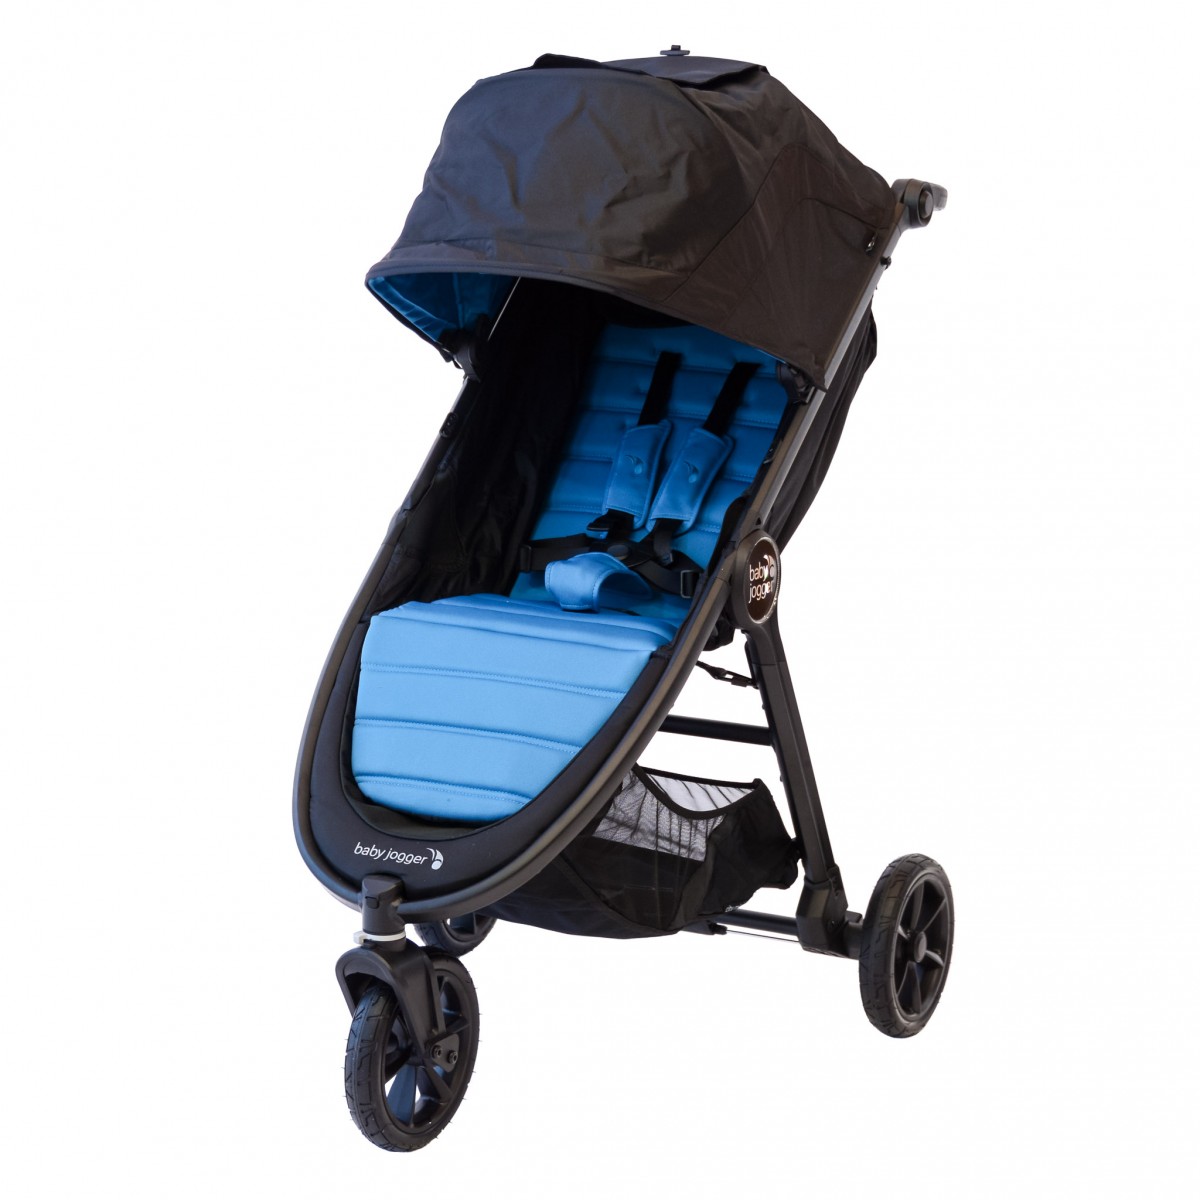 Baby Jogger City Mini GT2 Review